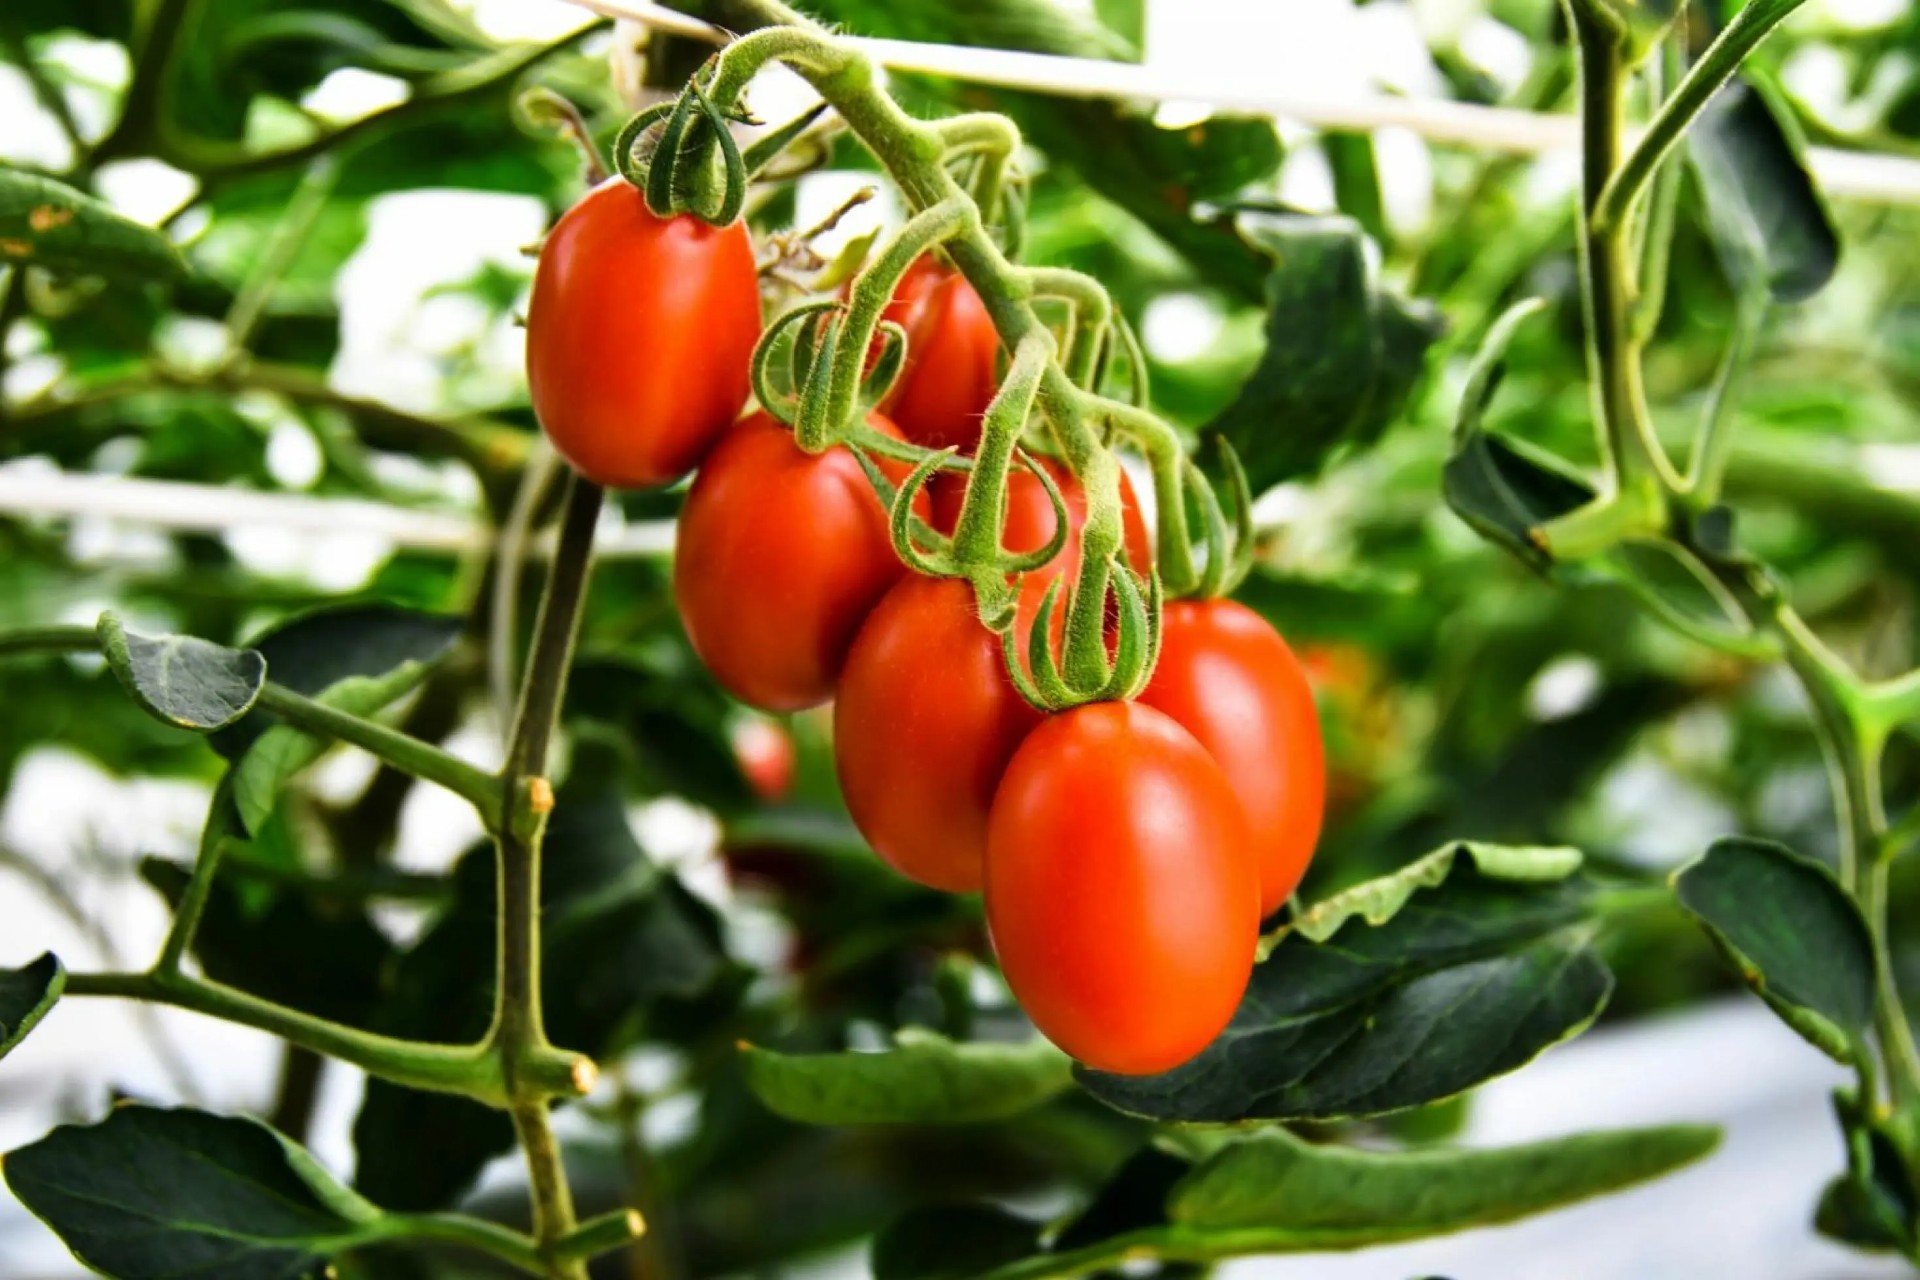 A cluster of ripe red tomatoes hangs from a vine amidst green leaves in a garden setting.